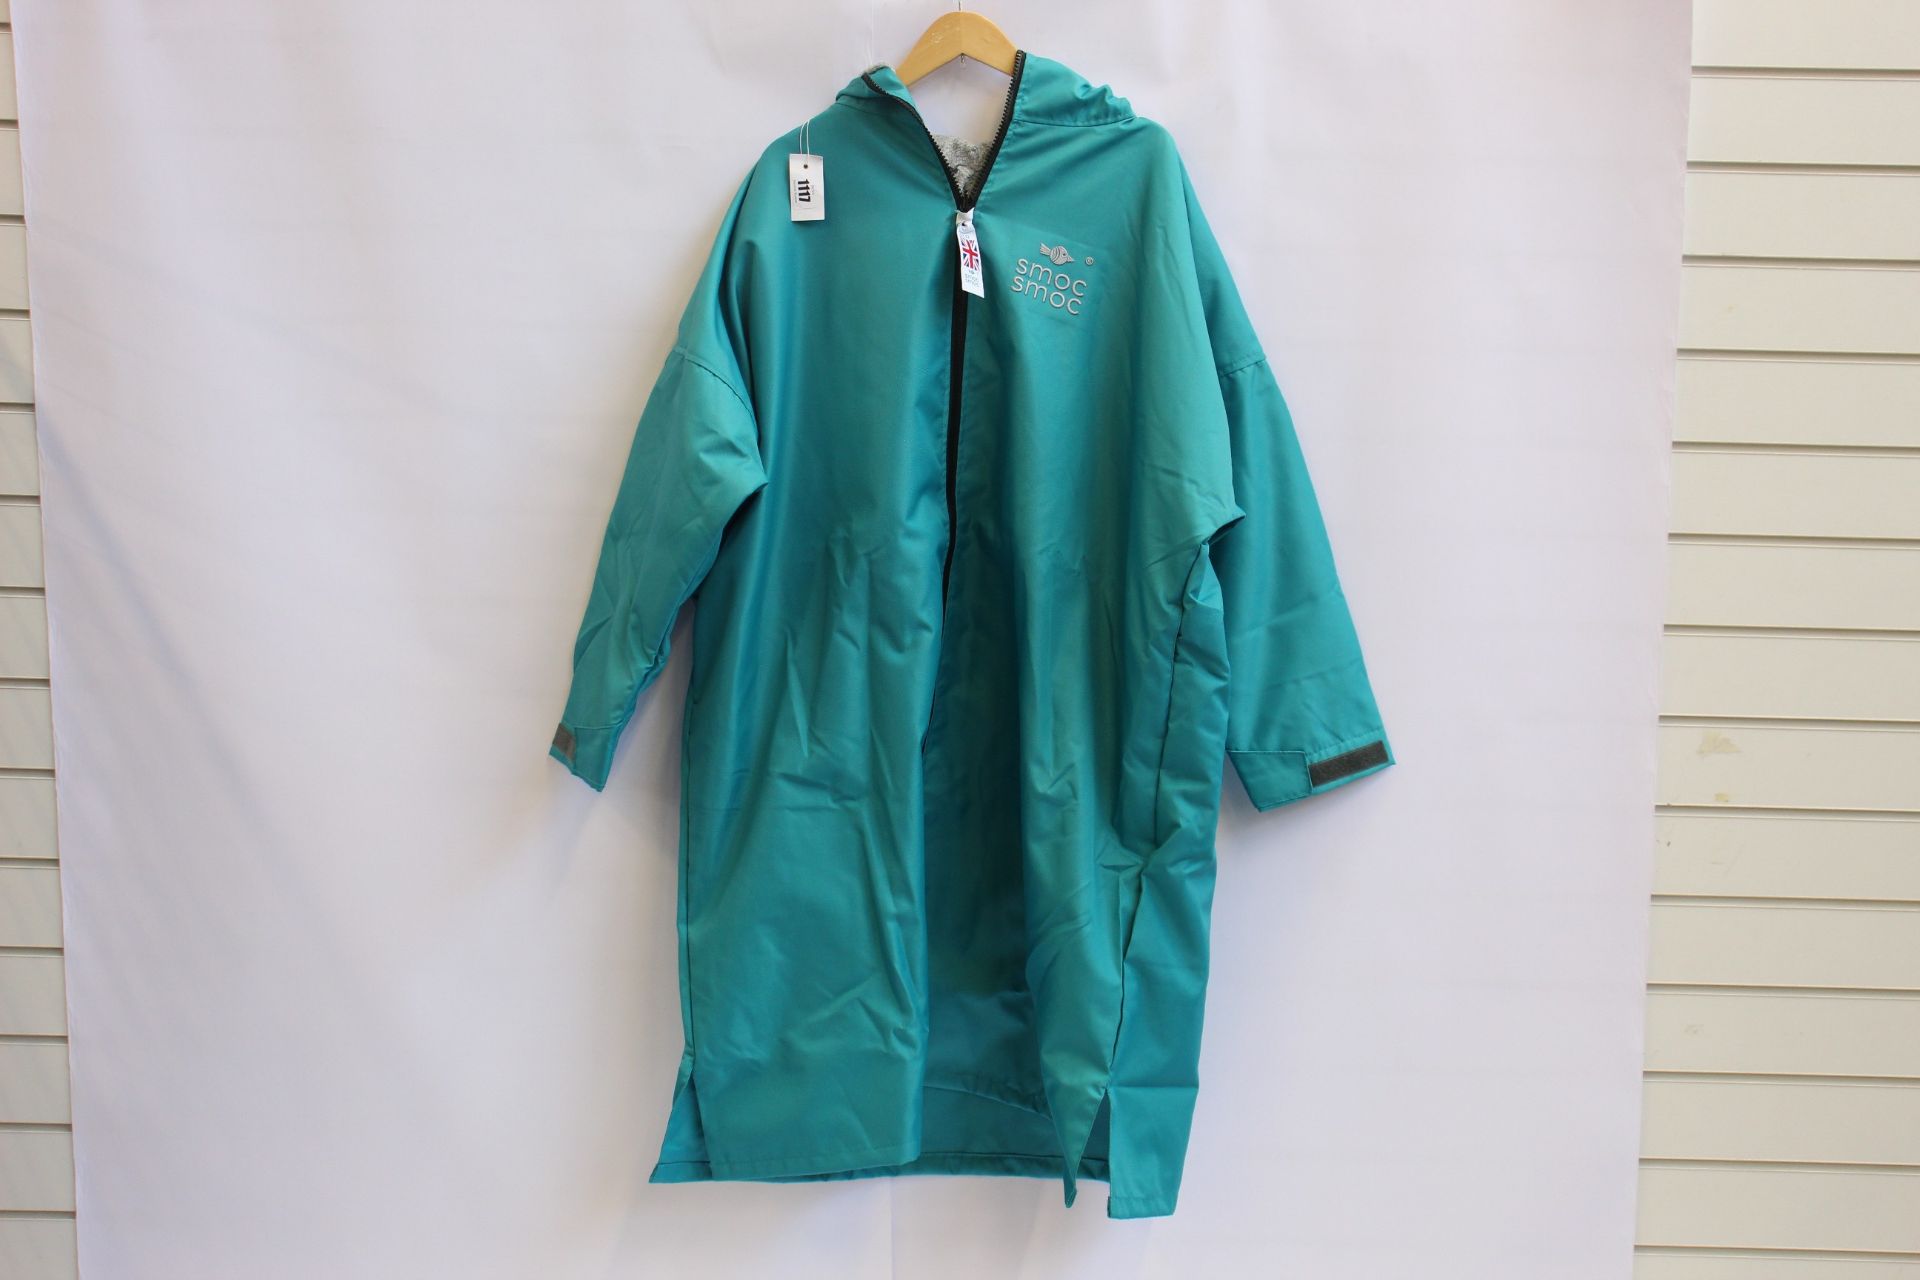 An as new Smoc Smoc full zip smock in teal and pebble grey (M - RRP £140).